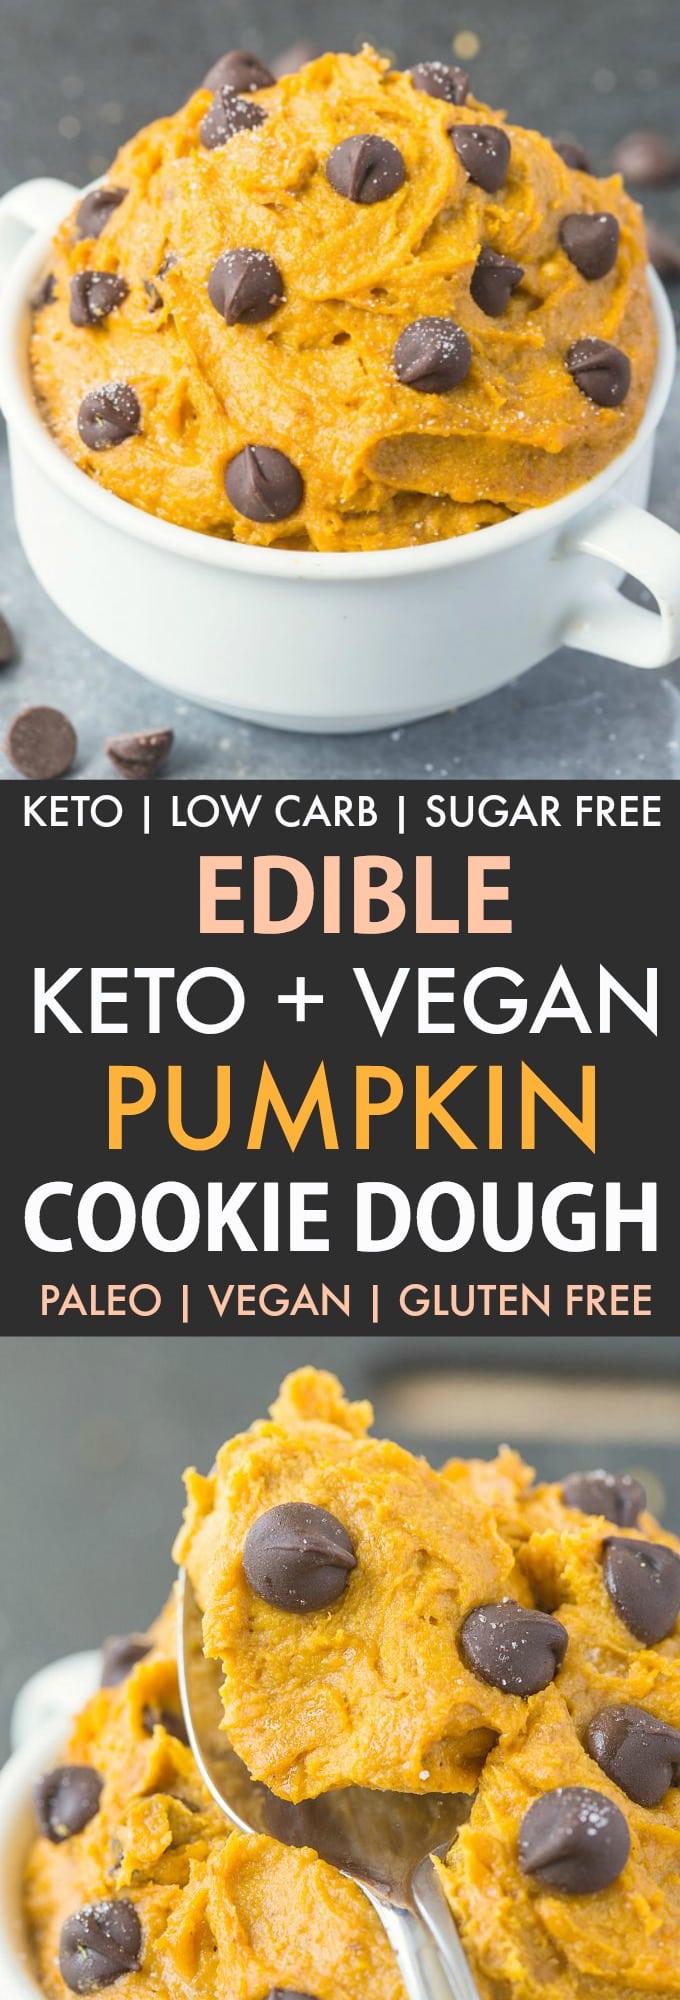 Healthy Paleo Vegan Pumpkin Cookie Dough in a white bowl and collage